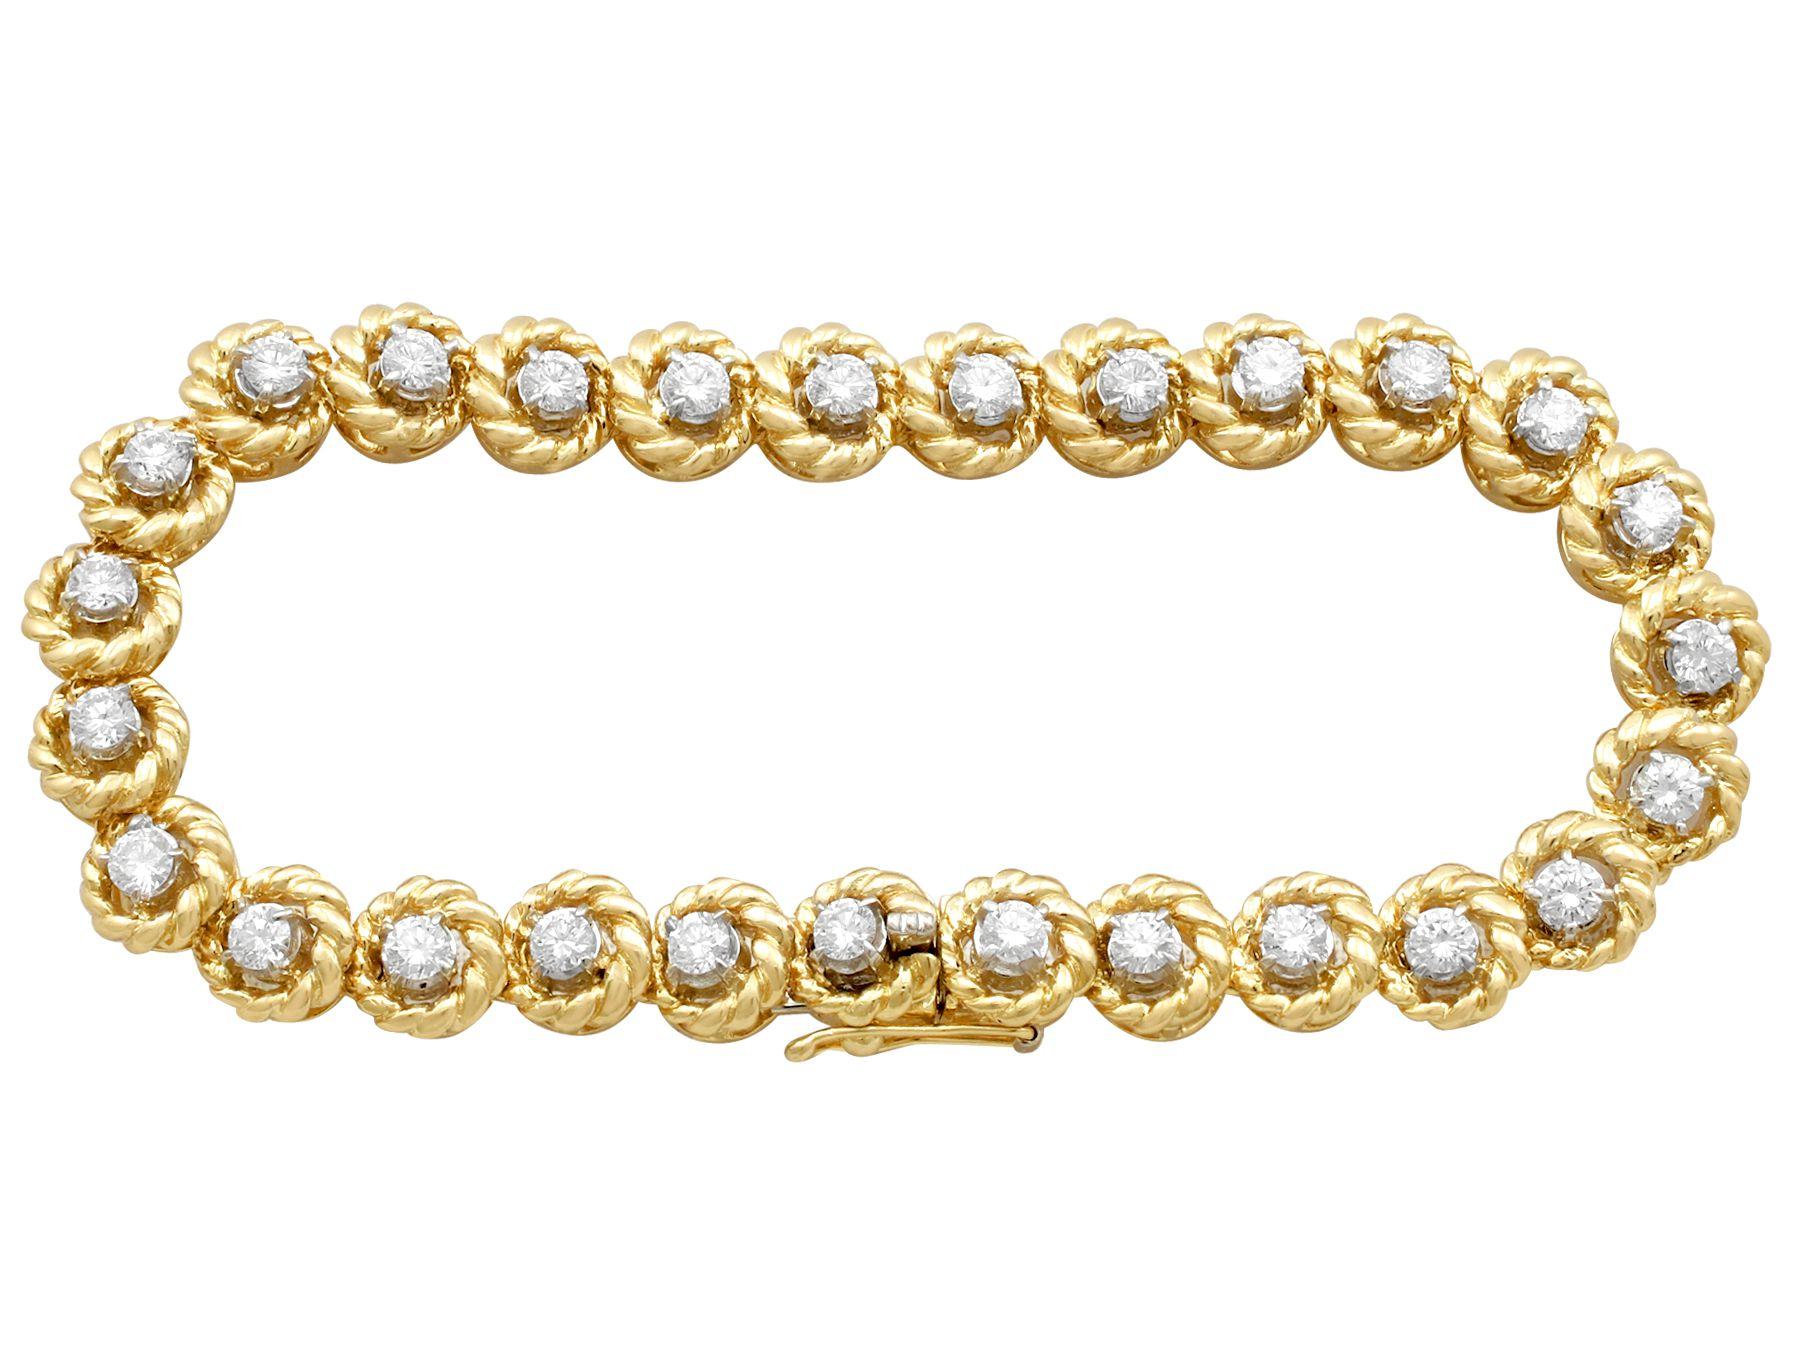 A stunning, fine and impressive vintage Italian 3.78 carat diamond bracelet crafted in 18k yellow gold; part of our diverse diamond jewelry collection.

This stunning vintage Italian diamond bracelet has been crafted in 18k yellow gold.

The